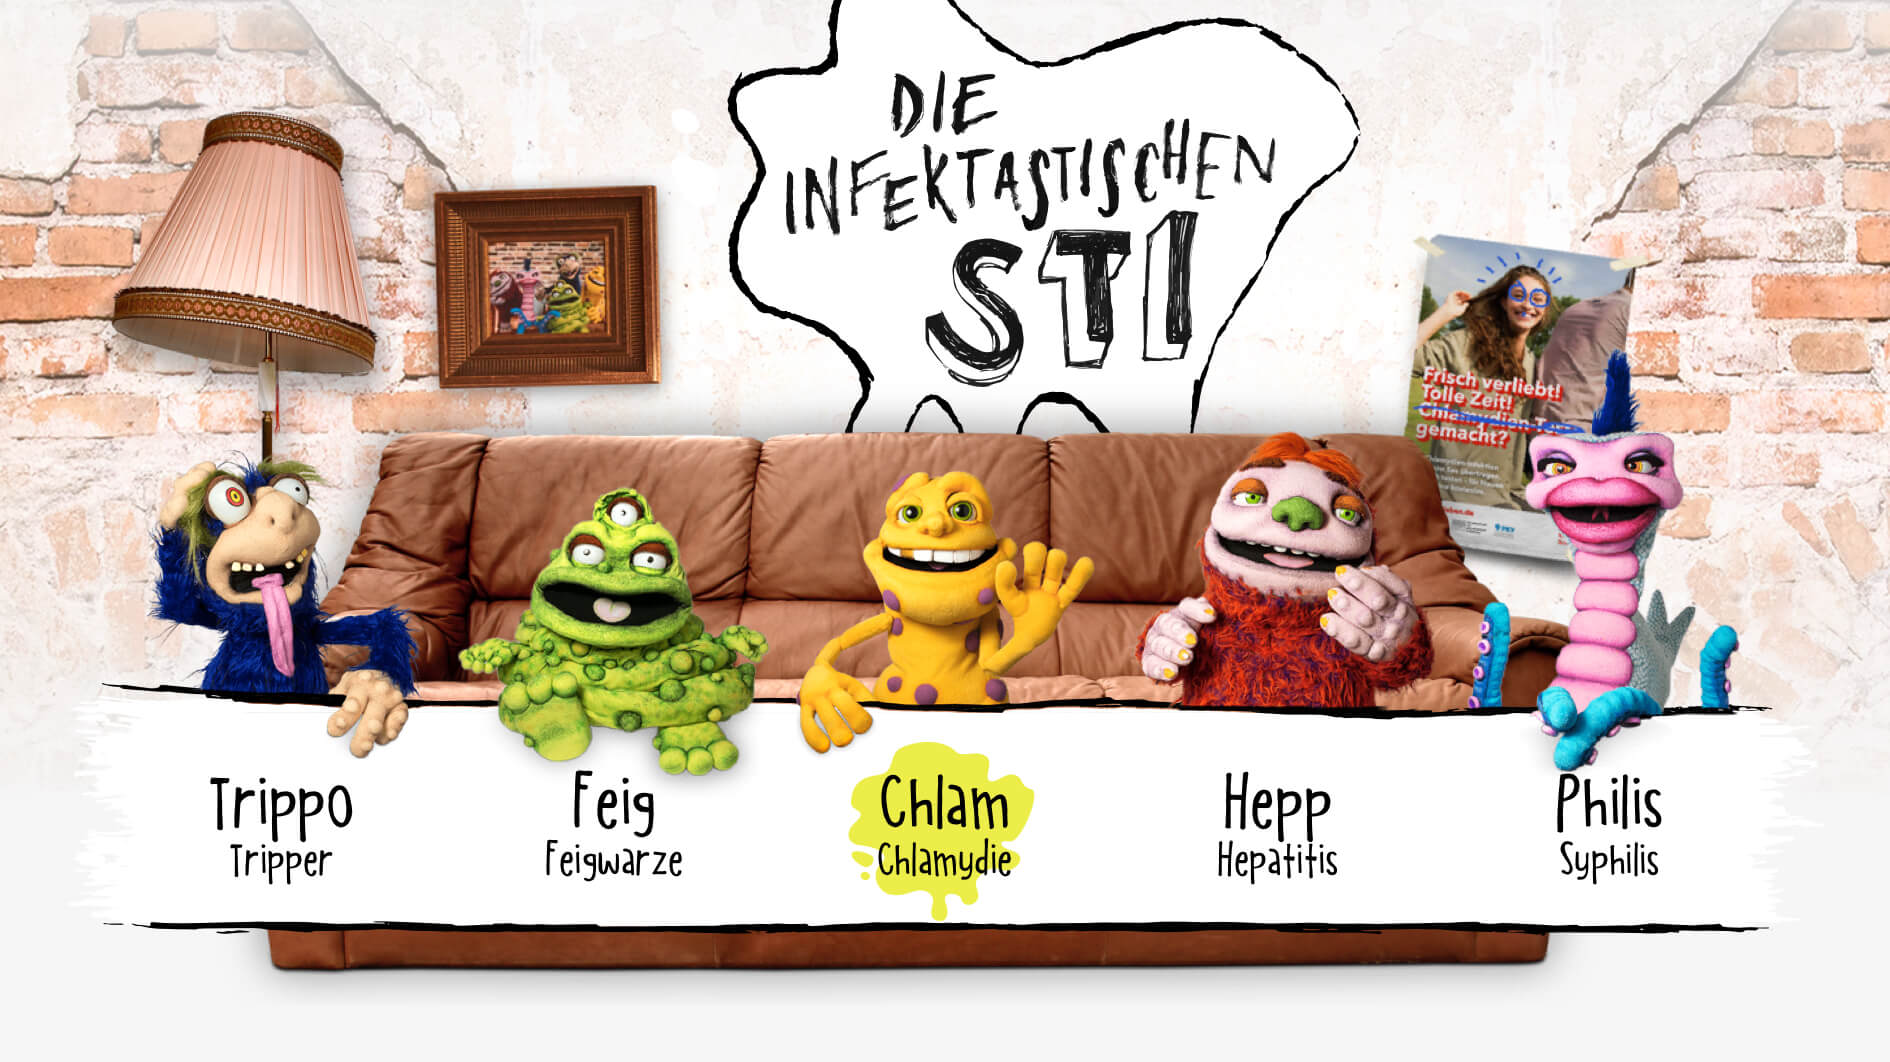 A scene in a run-down living room. There is a couch in the background. In front of it are 5 rather weird-looking colorful hand puppets called "Trippo Tripper", "Feig Feigwarze", "Chlam Chlamydie", "Hepp Hepatitis" and "Phylis Syphilis". The "Infectastic STIs".